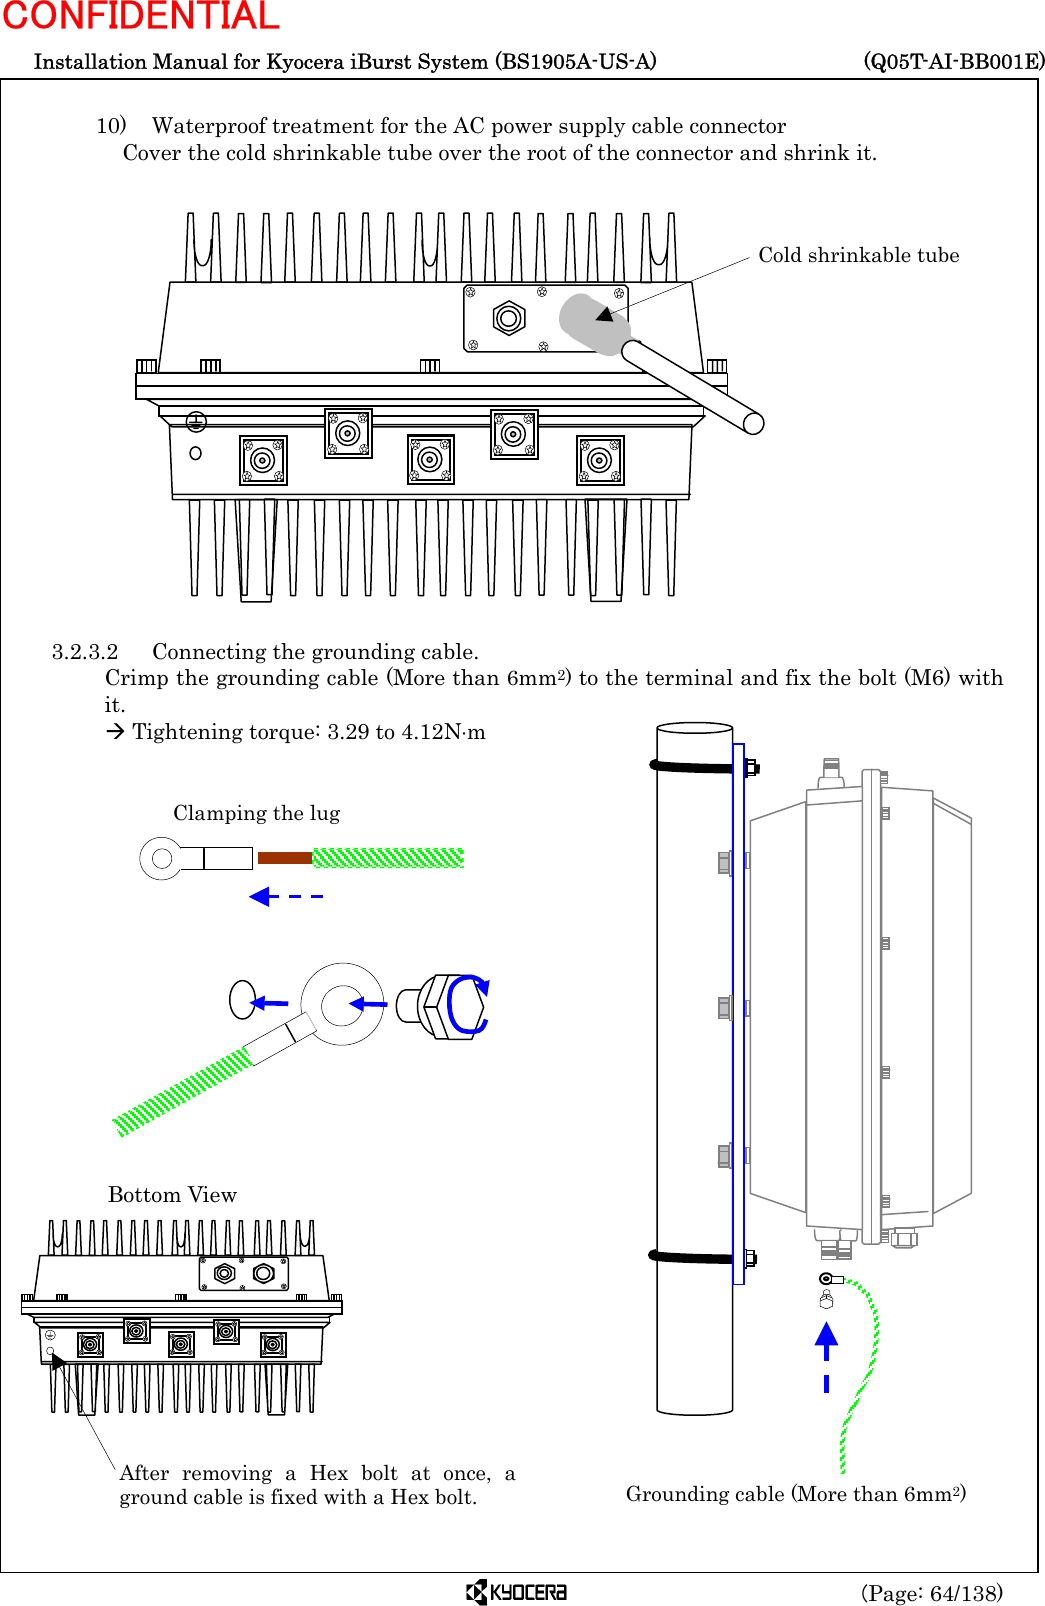  Installation Manual for Kyocera iBurst System (BS1905A-US-A)     (Q05T-AI-BB001E) (Page: 64/138) CONFIDENTIAL  10)    Waterproof treatment for the AC power supply cable connector  Cover the cold shrinkable tube over the root of the connector and shrink it.                   3.2.3.2  Connecting the grounding cable. Crimp the grounding cable (More than 6mm2) to the terminal and fix the bolt (M6) with it. Æ Tightening torque: 3.29 to 4.12N⋅m                                     Cold shrinkable tube Clamping the lug After removing a Hex bolt at once, aground cable is fixed with a Hex bolt. Bottom View Grounding cable (More than 6mm2) 